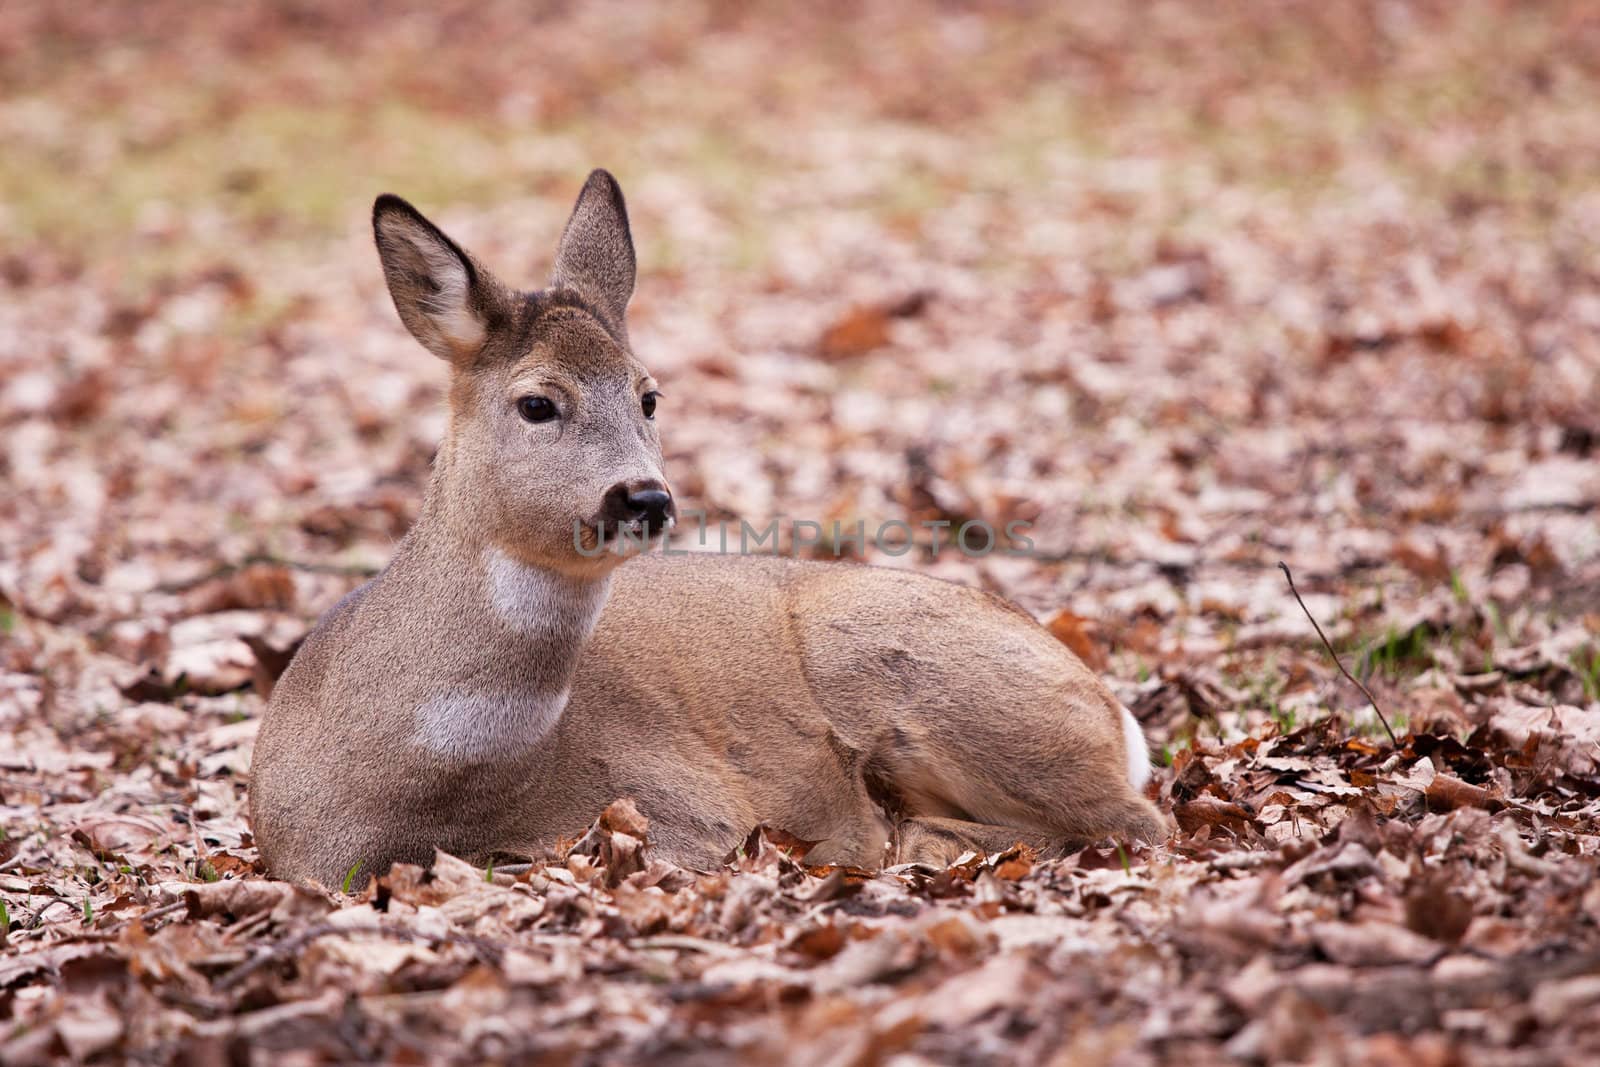 A cute little deer that you just want to hug in the park